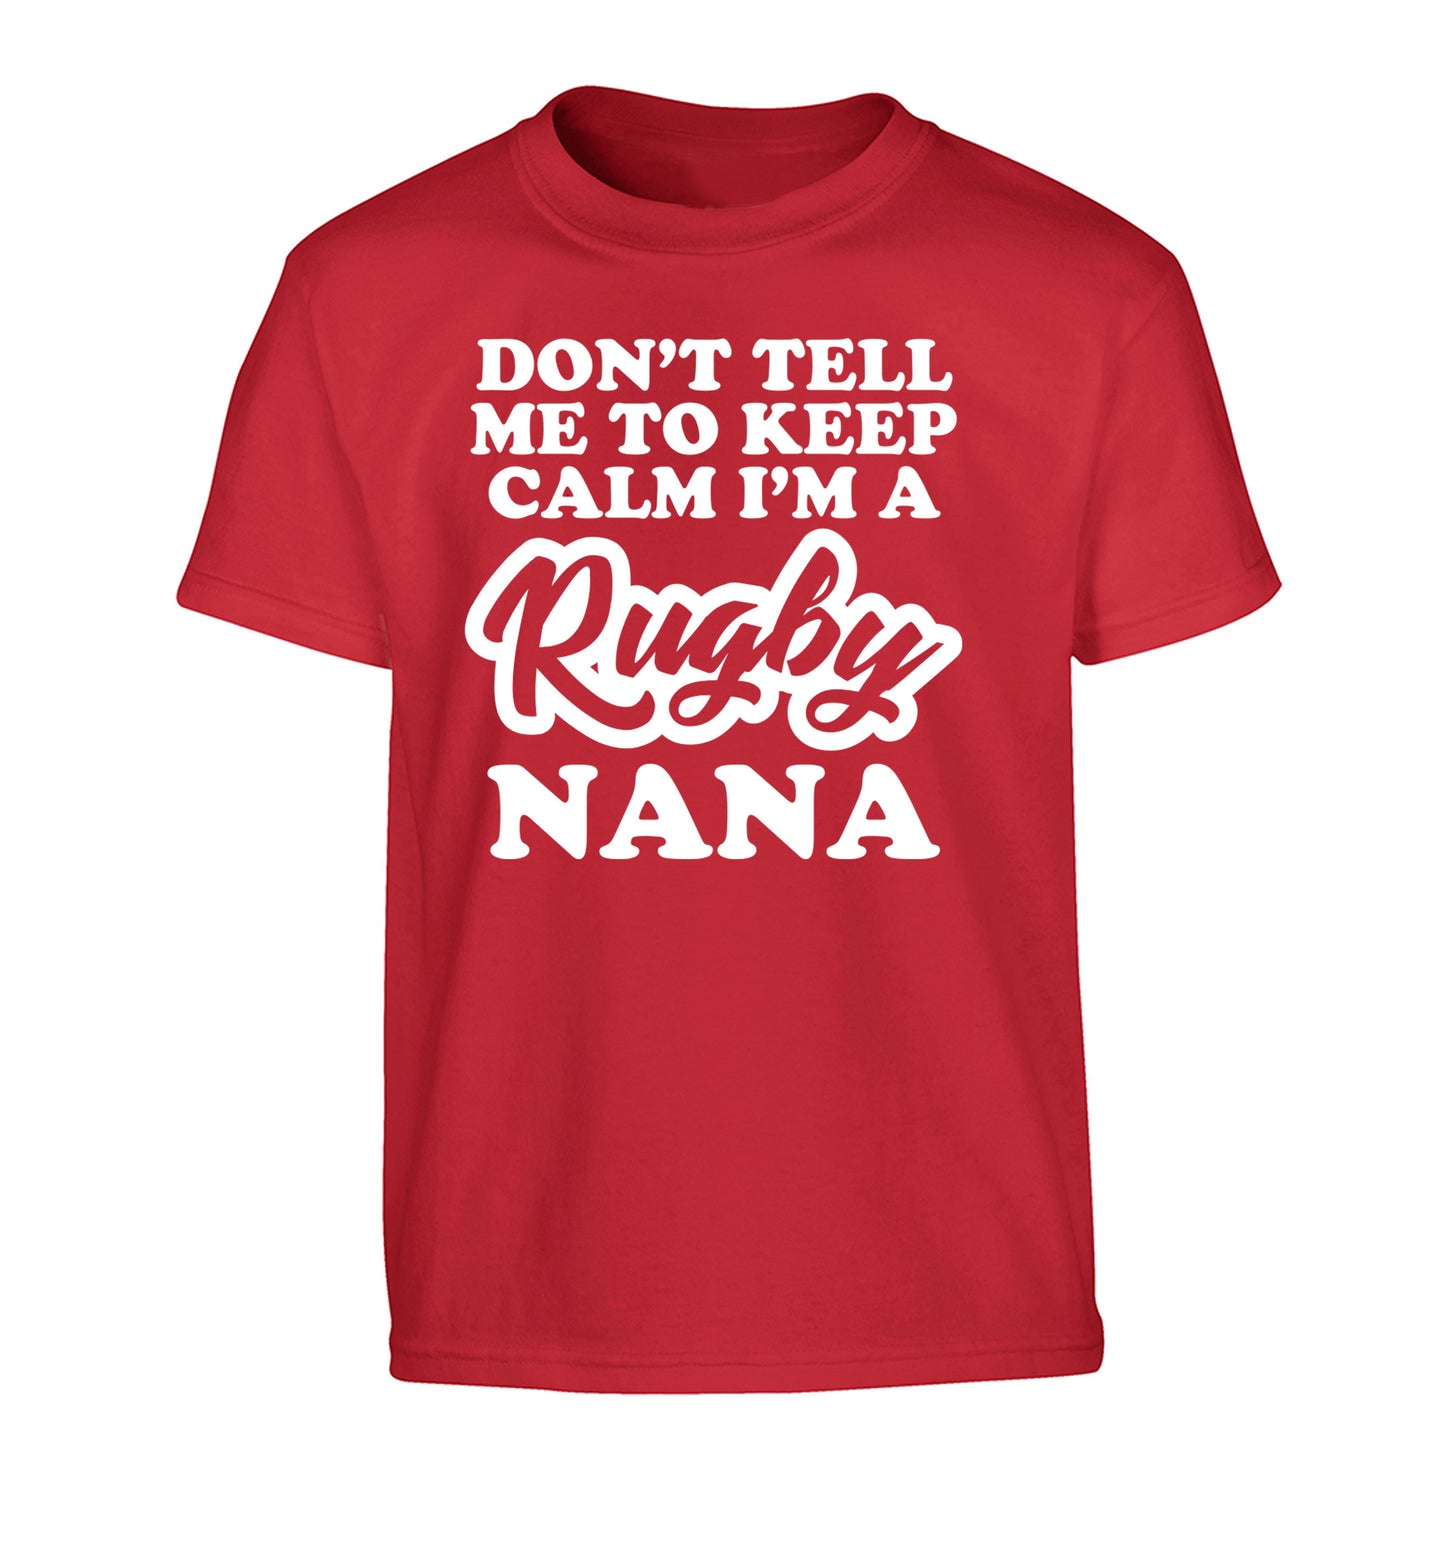 Don't tell me to keep calm I'm a rugby nana Children's red Tshirt 12-13 Years